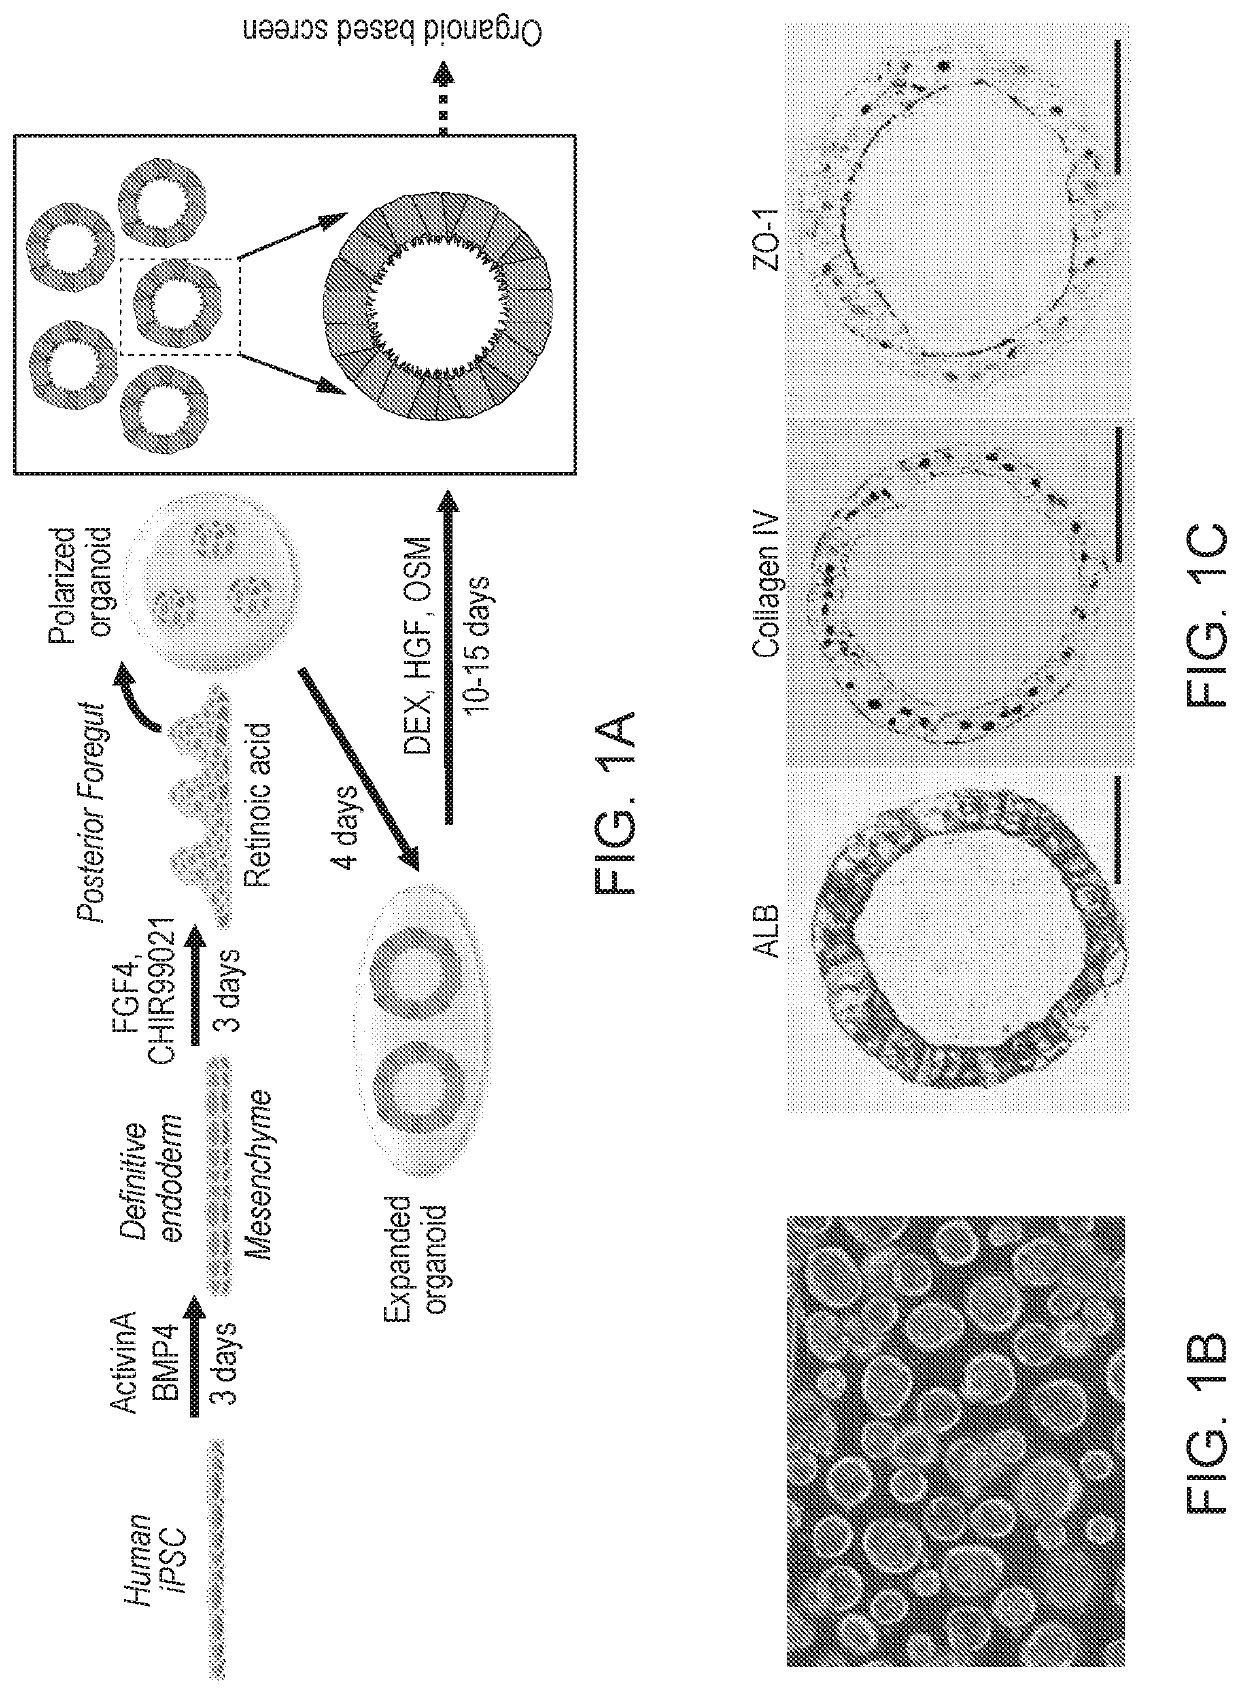 Liver organoid compositions and methods of making and using same